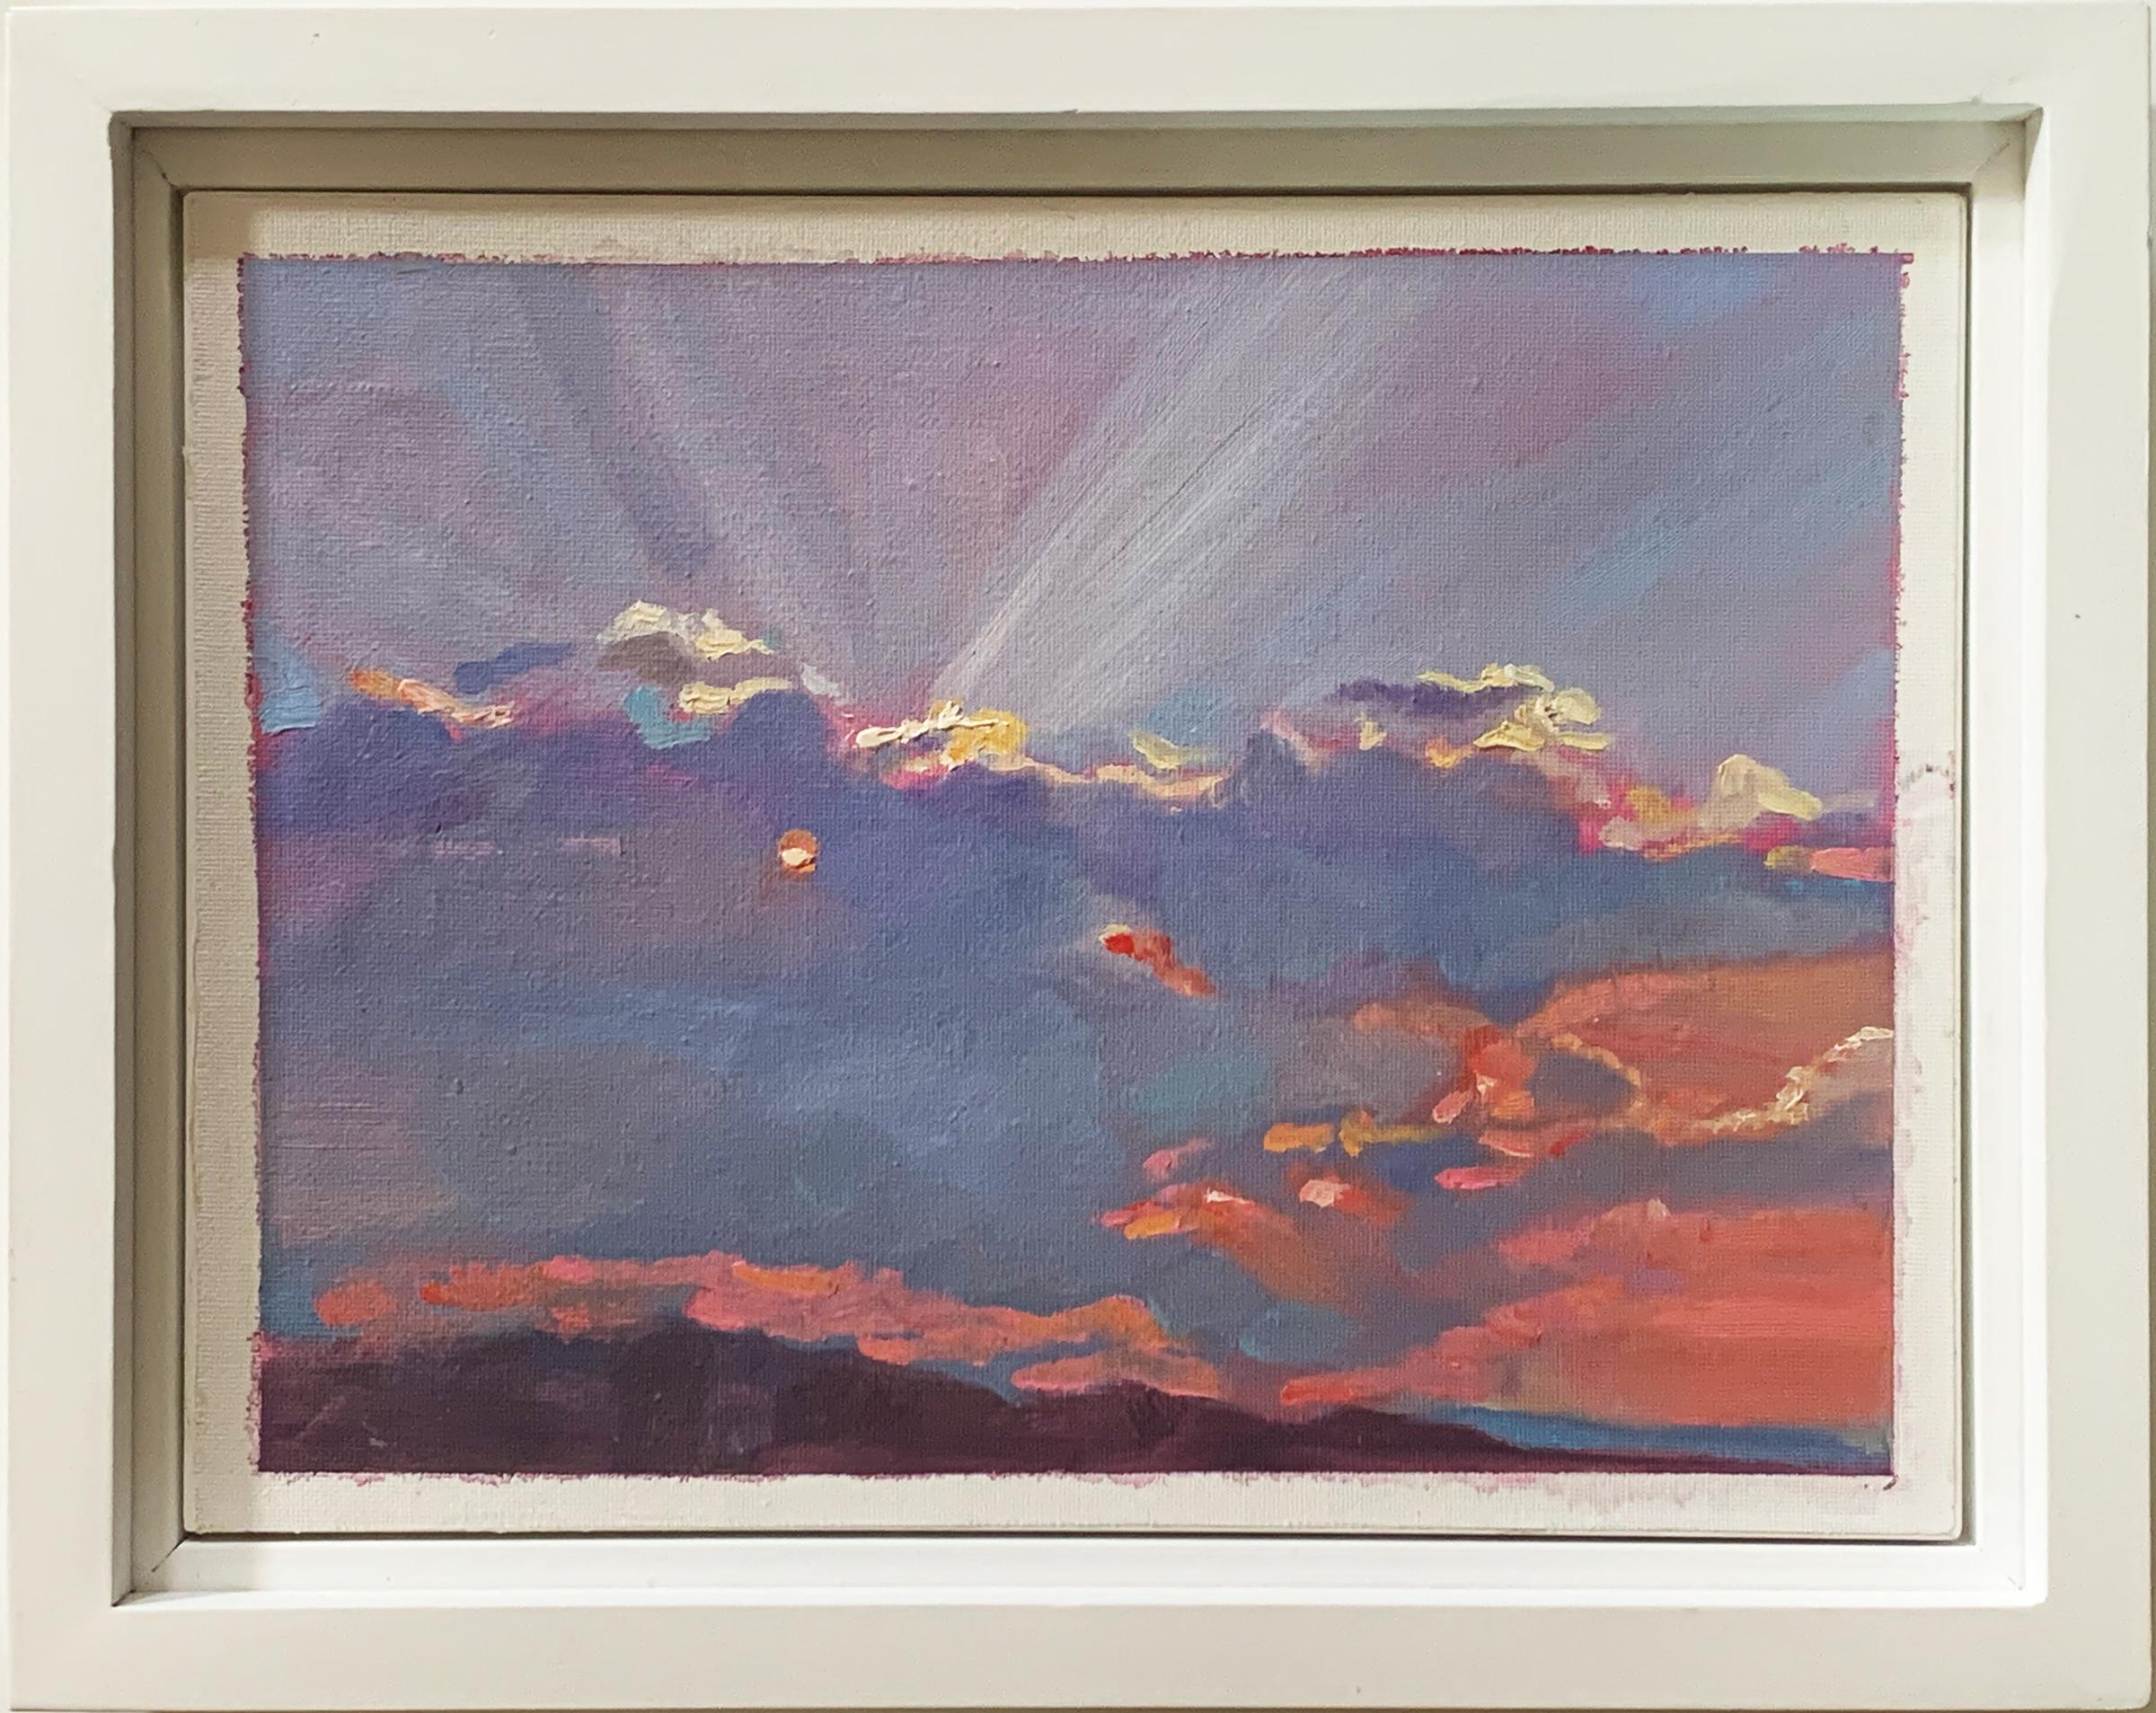 July 26, 2021 (Dramatic Pink Sunset Illuminating Clouds, oil on canvas, framed) - Painting by Carl Grauer